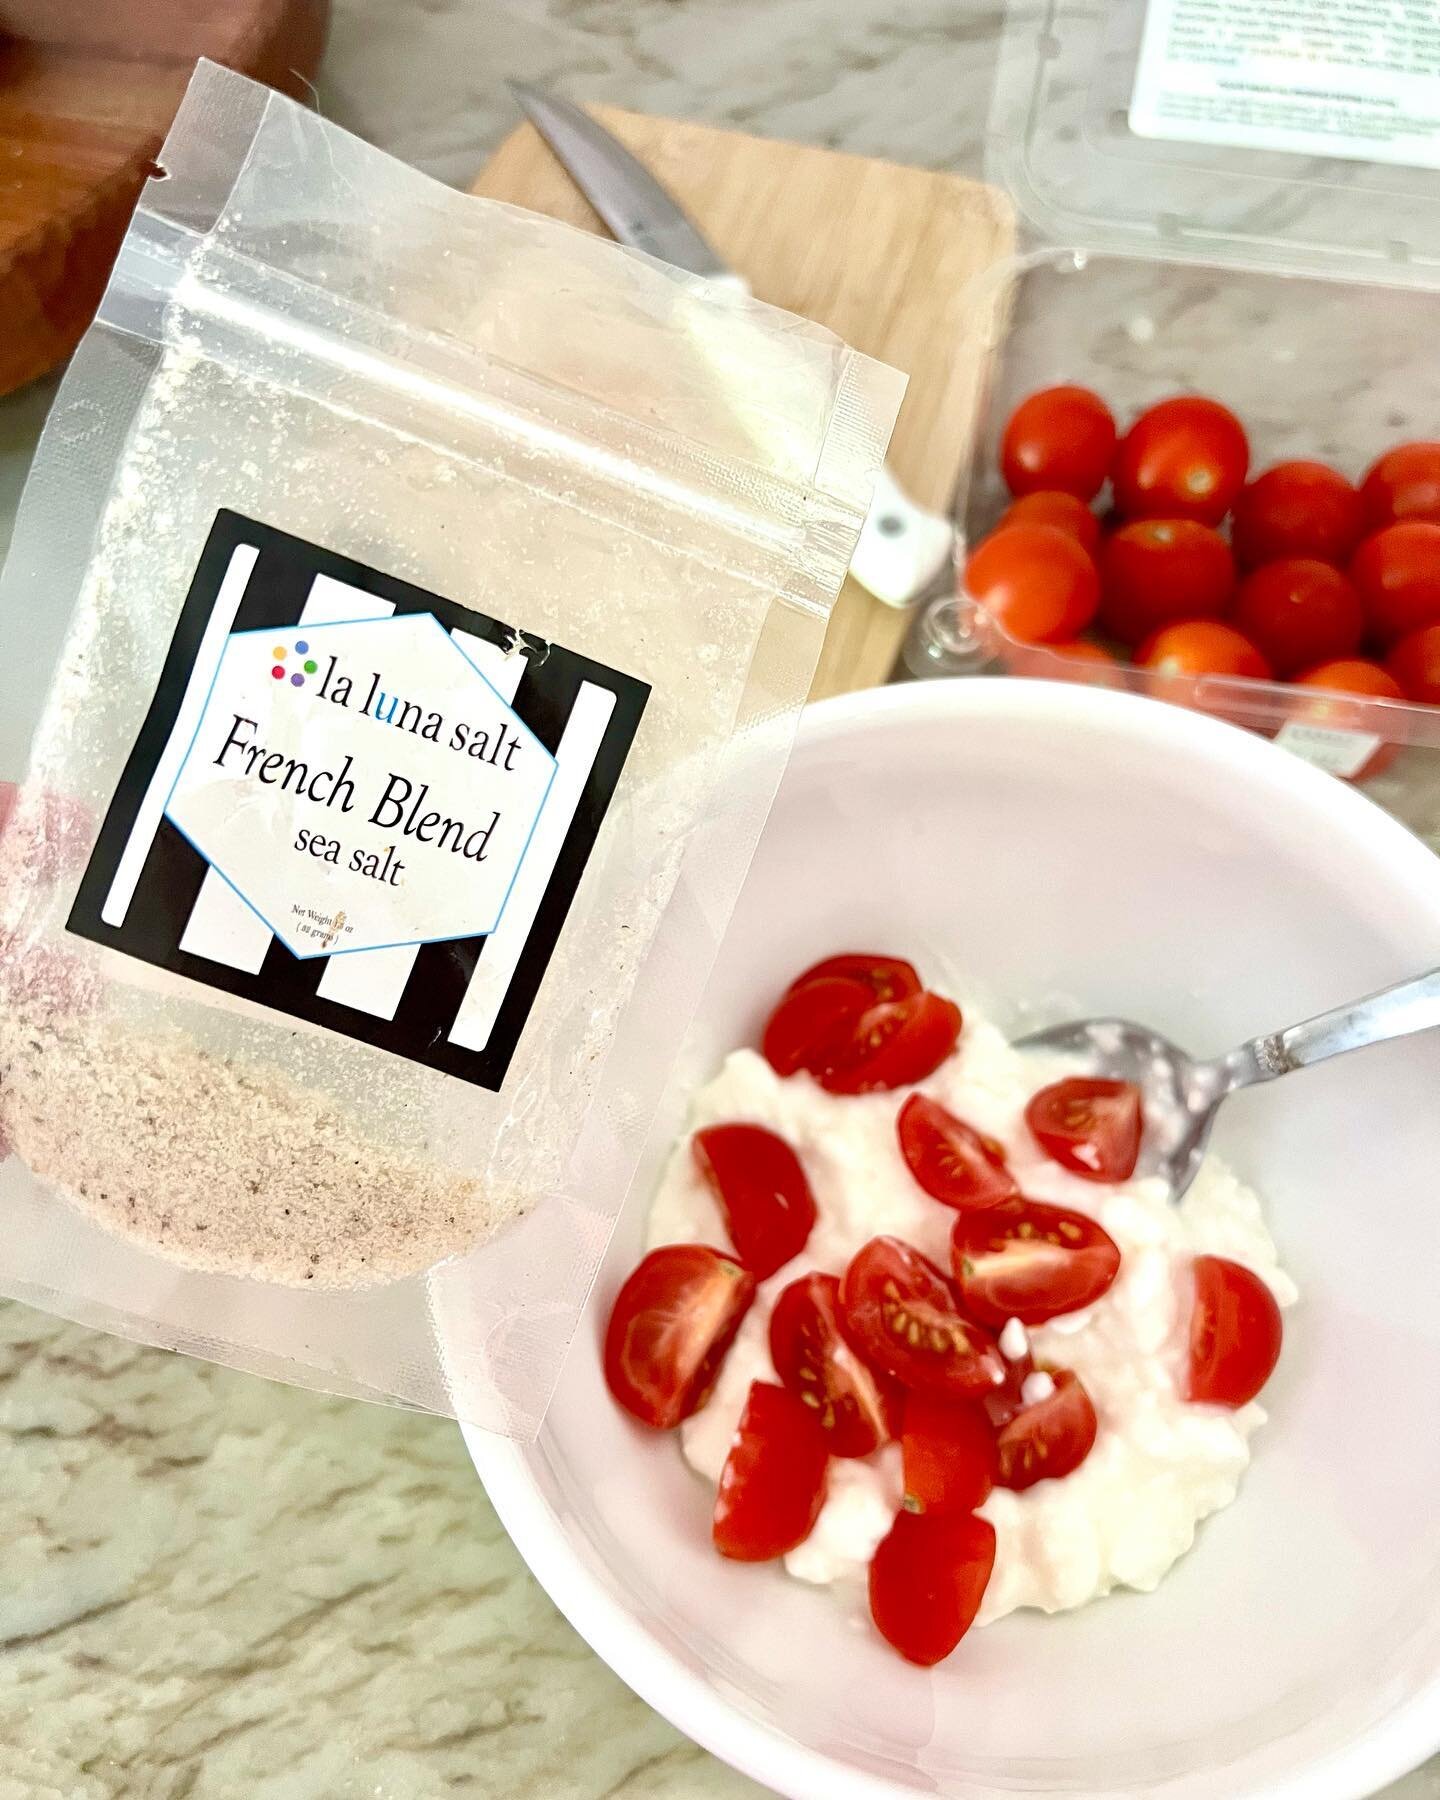 Easiest snack in the world!
&gt; 1 cup cottage cheese
&gt; Cherry tomatoes 
&gt; Sprinkle French Blend sea salt 

✏️This particular salt is a French grey salt and the fresh herbs that are infused - give it an &ldquo;herbs de Provence&rdquo; taste. 

